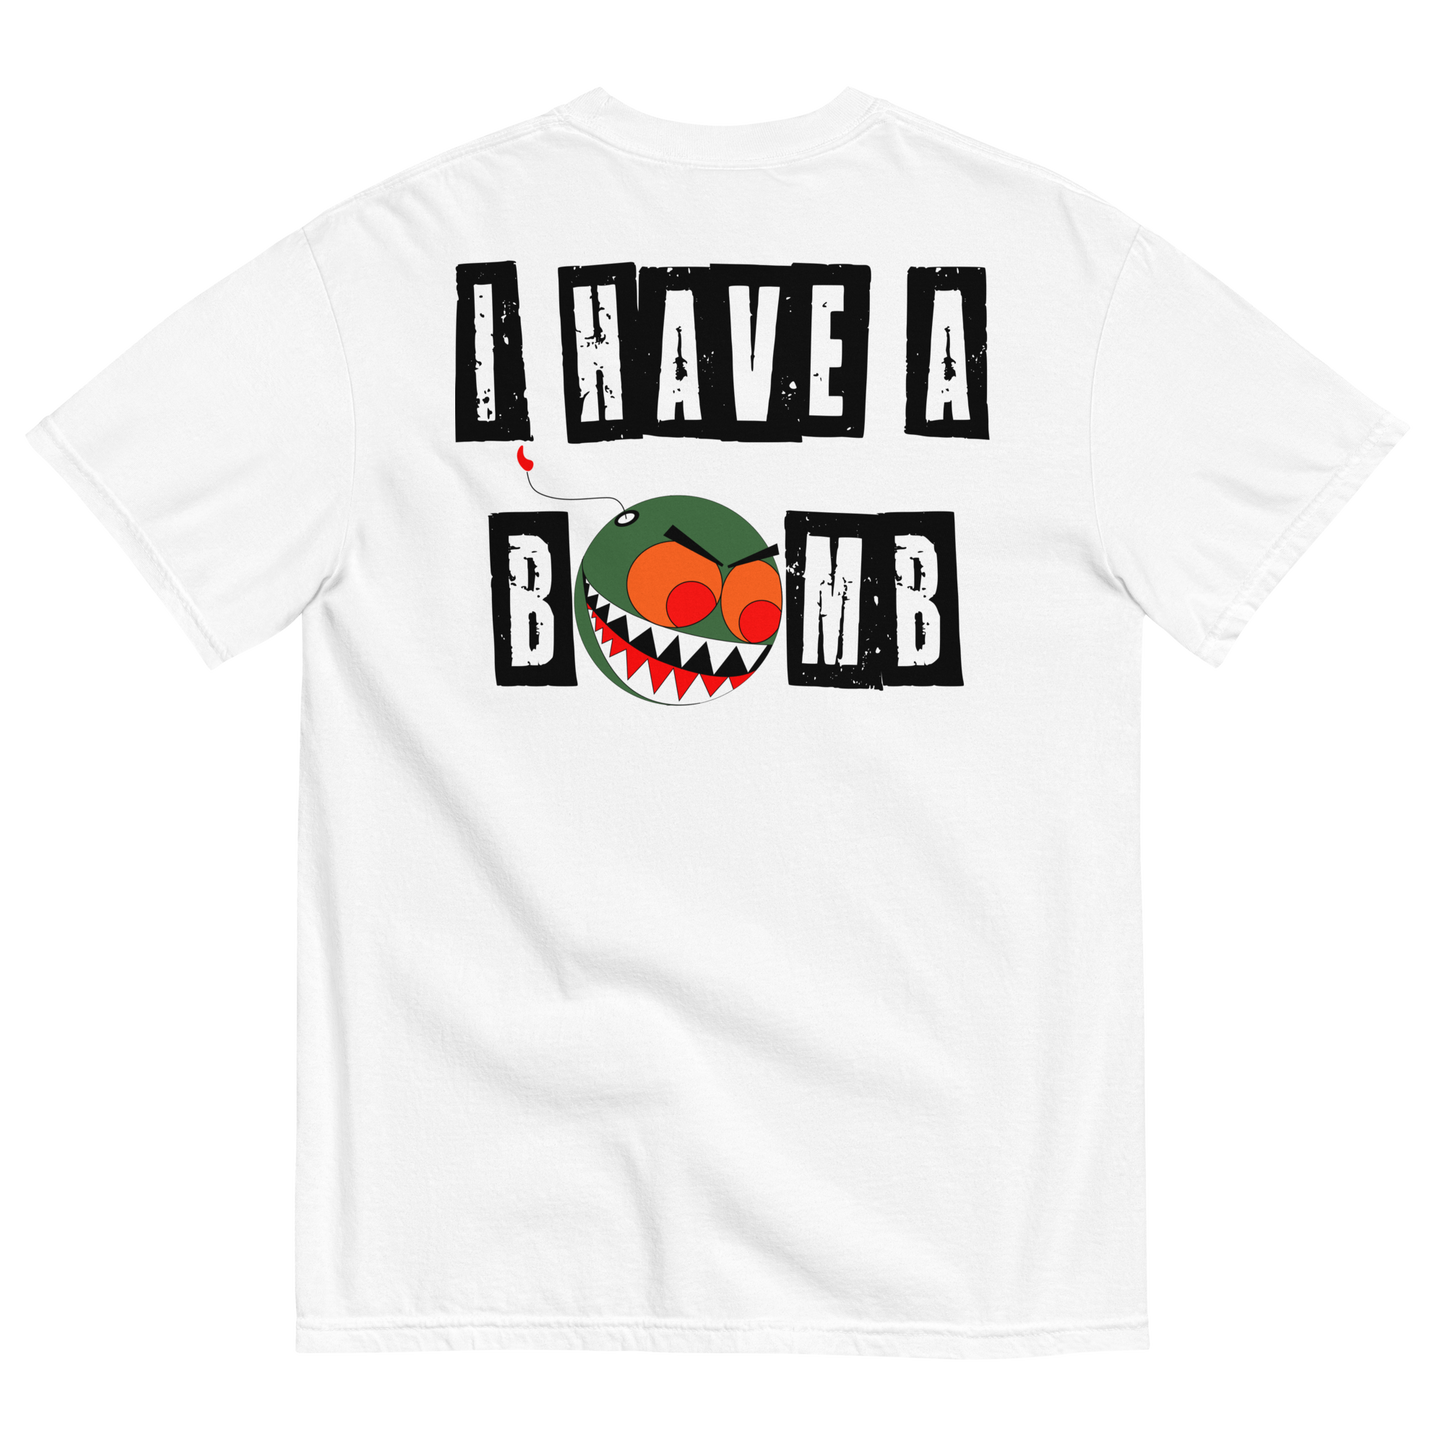 I HAVE A BOMB TEE BLACK TEXT (FRONT/BACK)